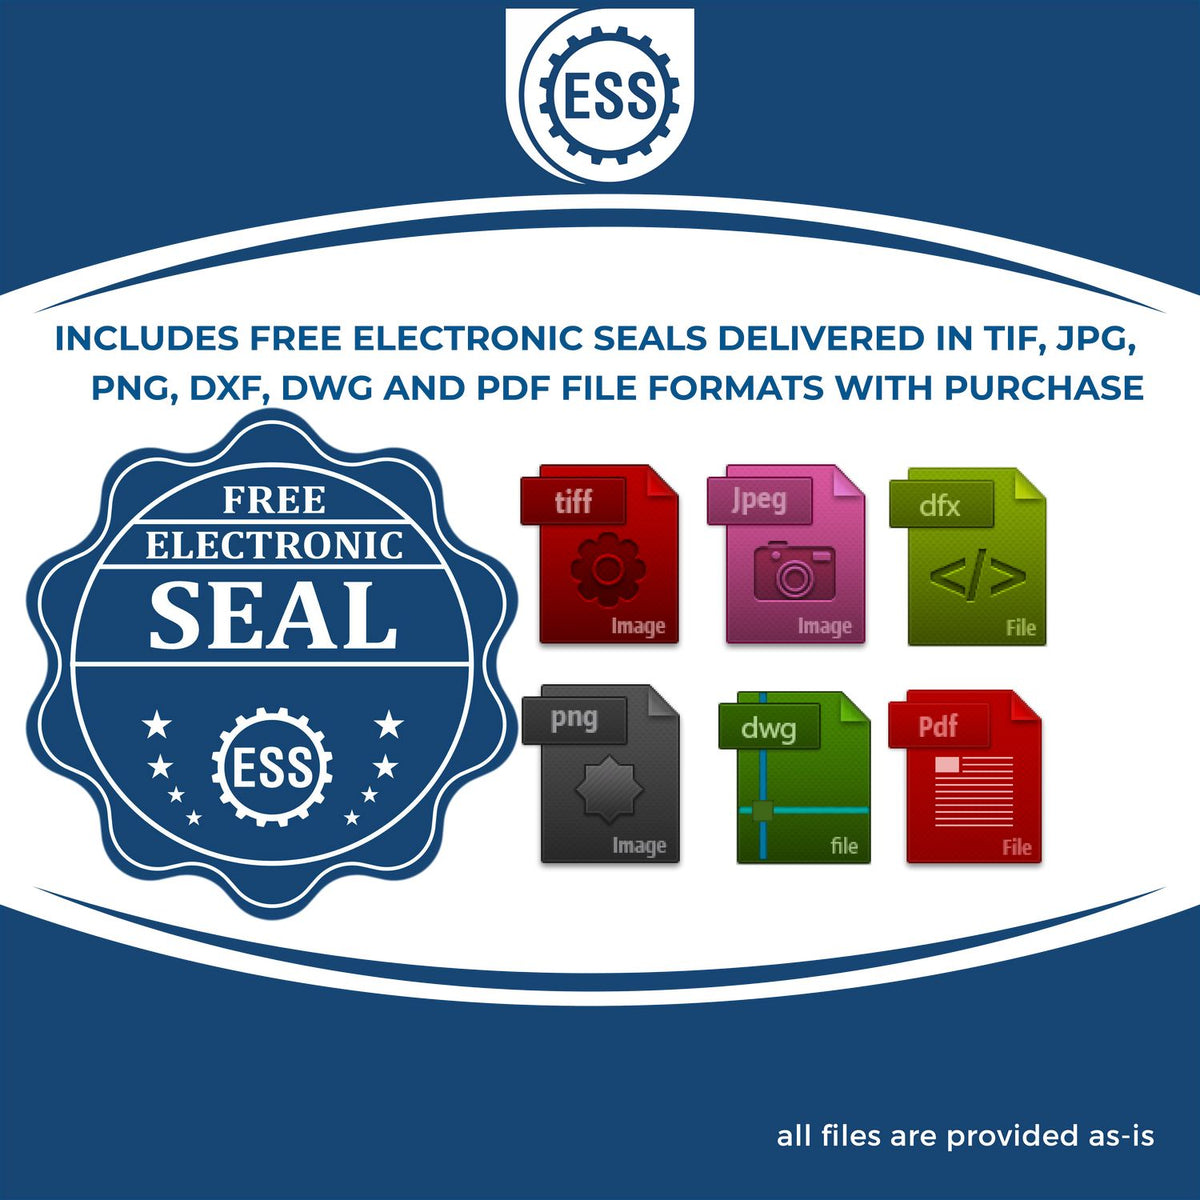 An infographic for the free electronic seal for the Hybrid Connecticut Land Surveyor Seal illustrating the different file type icons such as DXF, DWG, TIF, JPG and PNG.